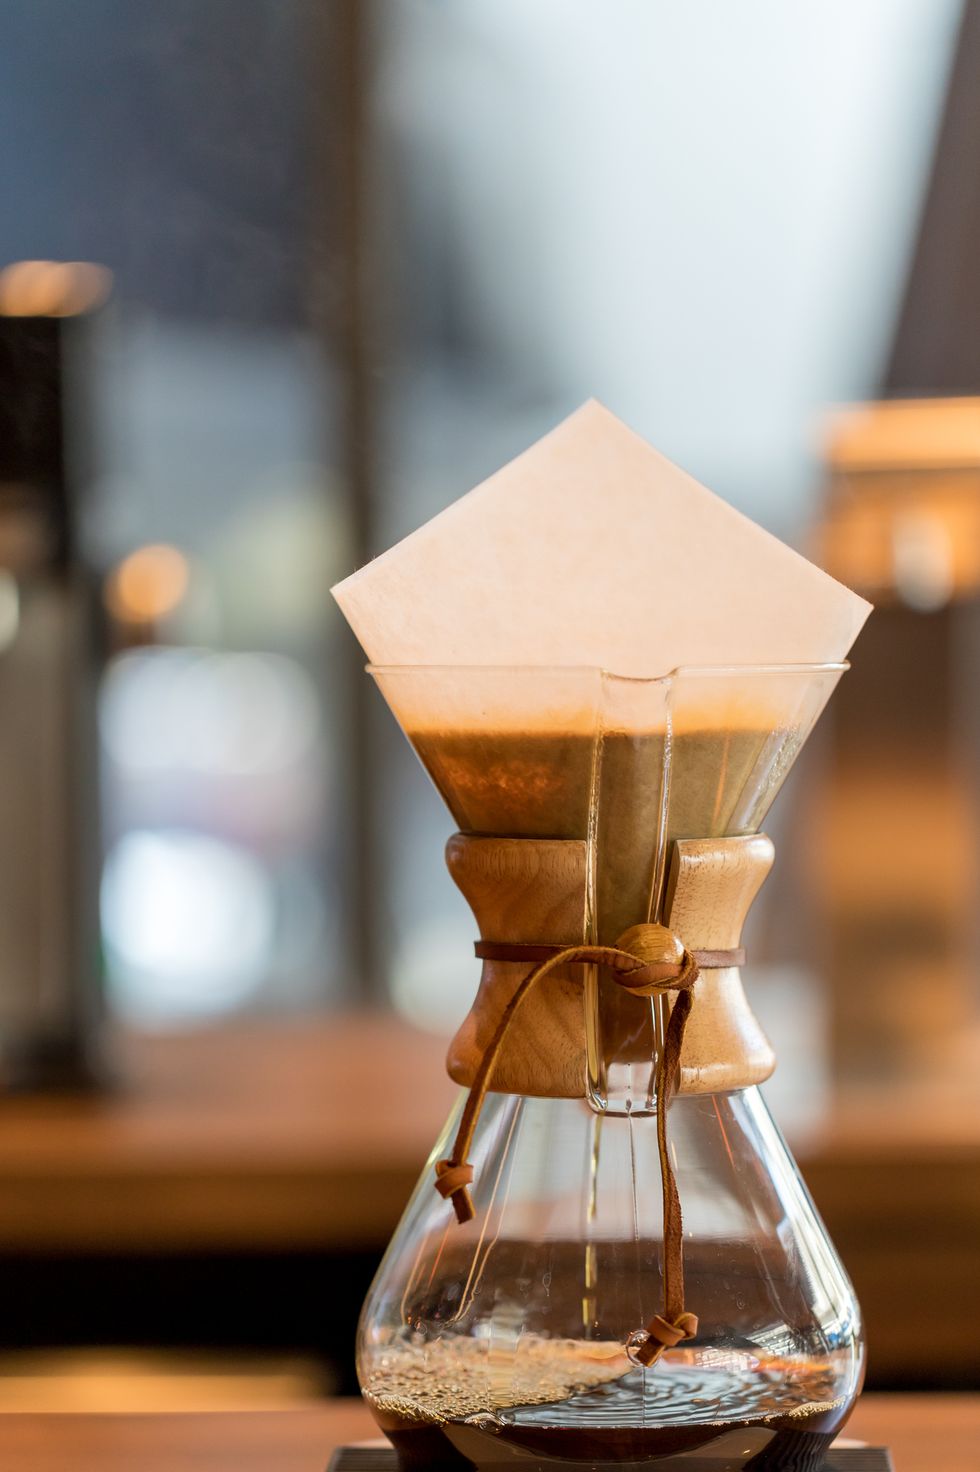 https://hips.hearstapps.com/hmg-prod/images/brewing-third-wave-coffee-with-chemex-glass-in-the-royalty-free-image-1608298373.?crop=0.872xw:0.873xh;0.128xw,0.127xh&resize=980:*